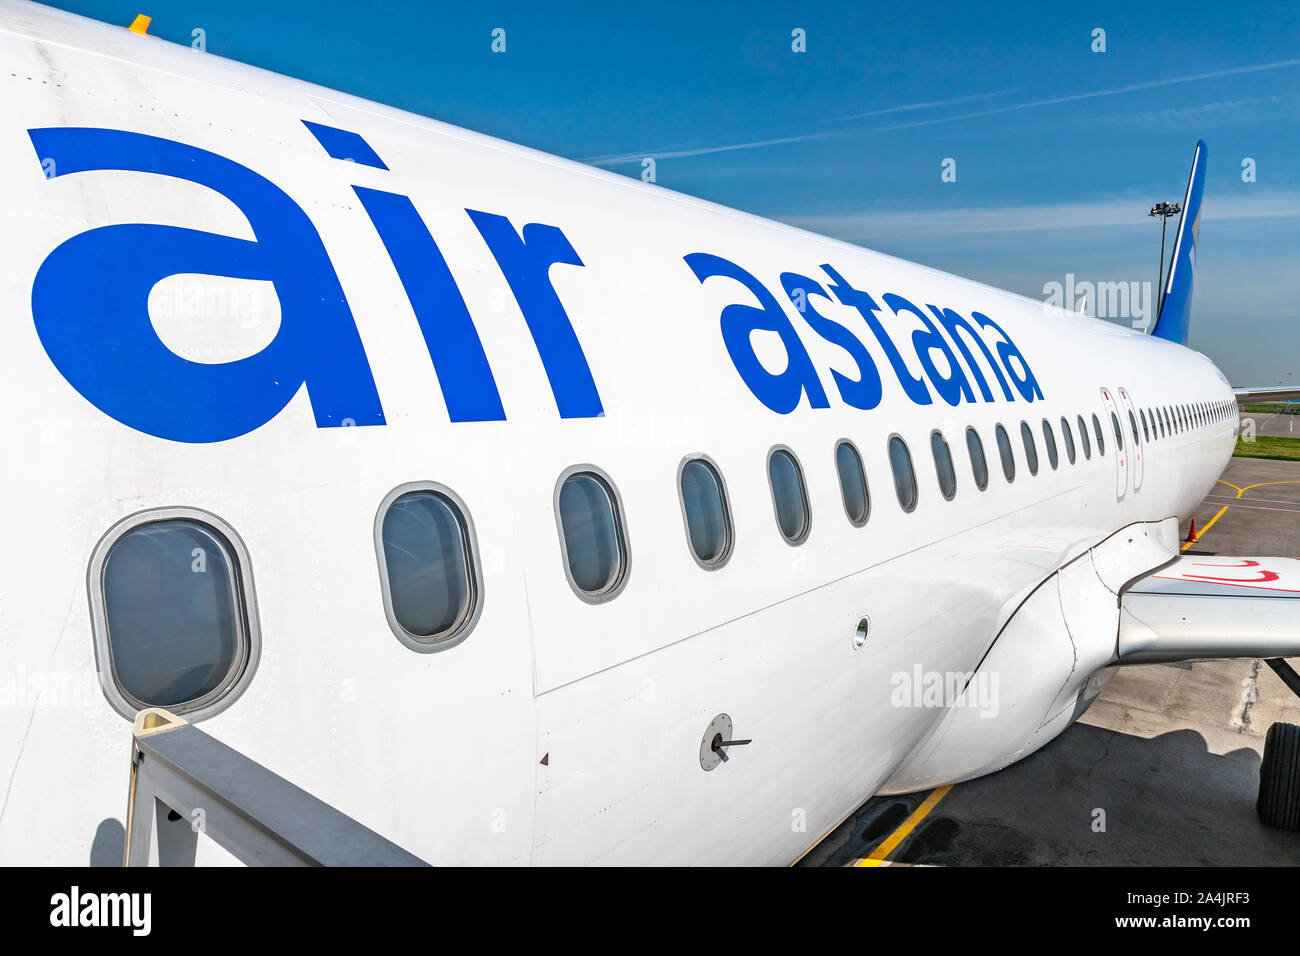 At Almaty International Airport Passengers are Waiting Outside for Boarding the Air Astana Aircraft Plane Stock Photo